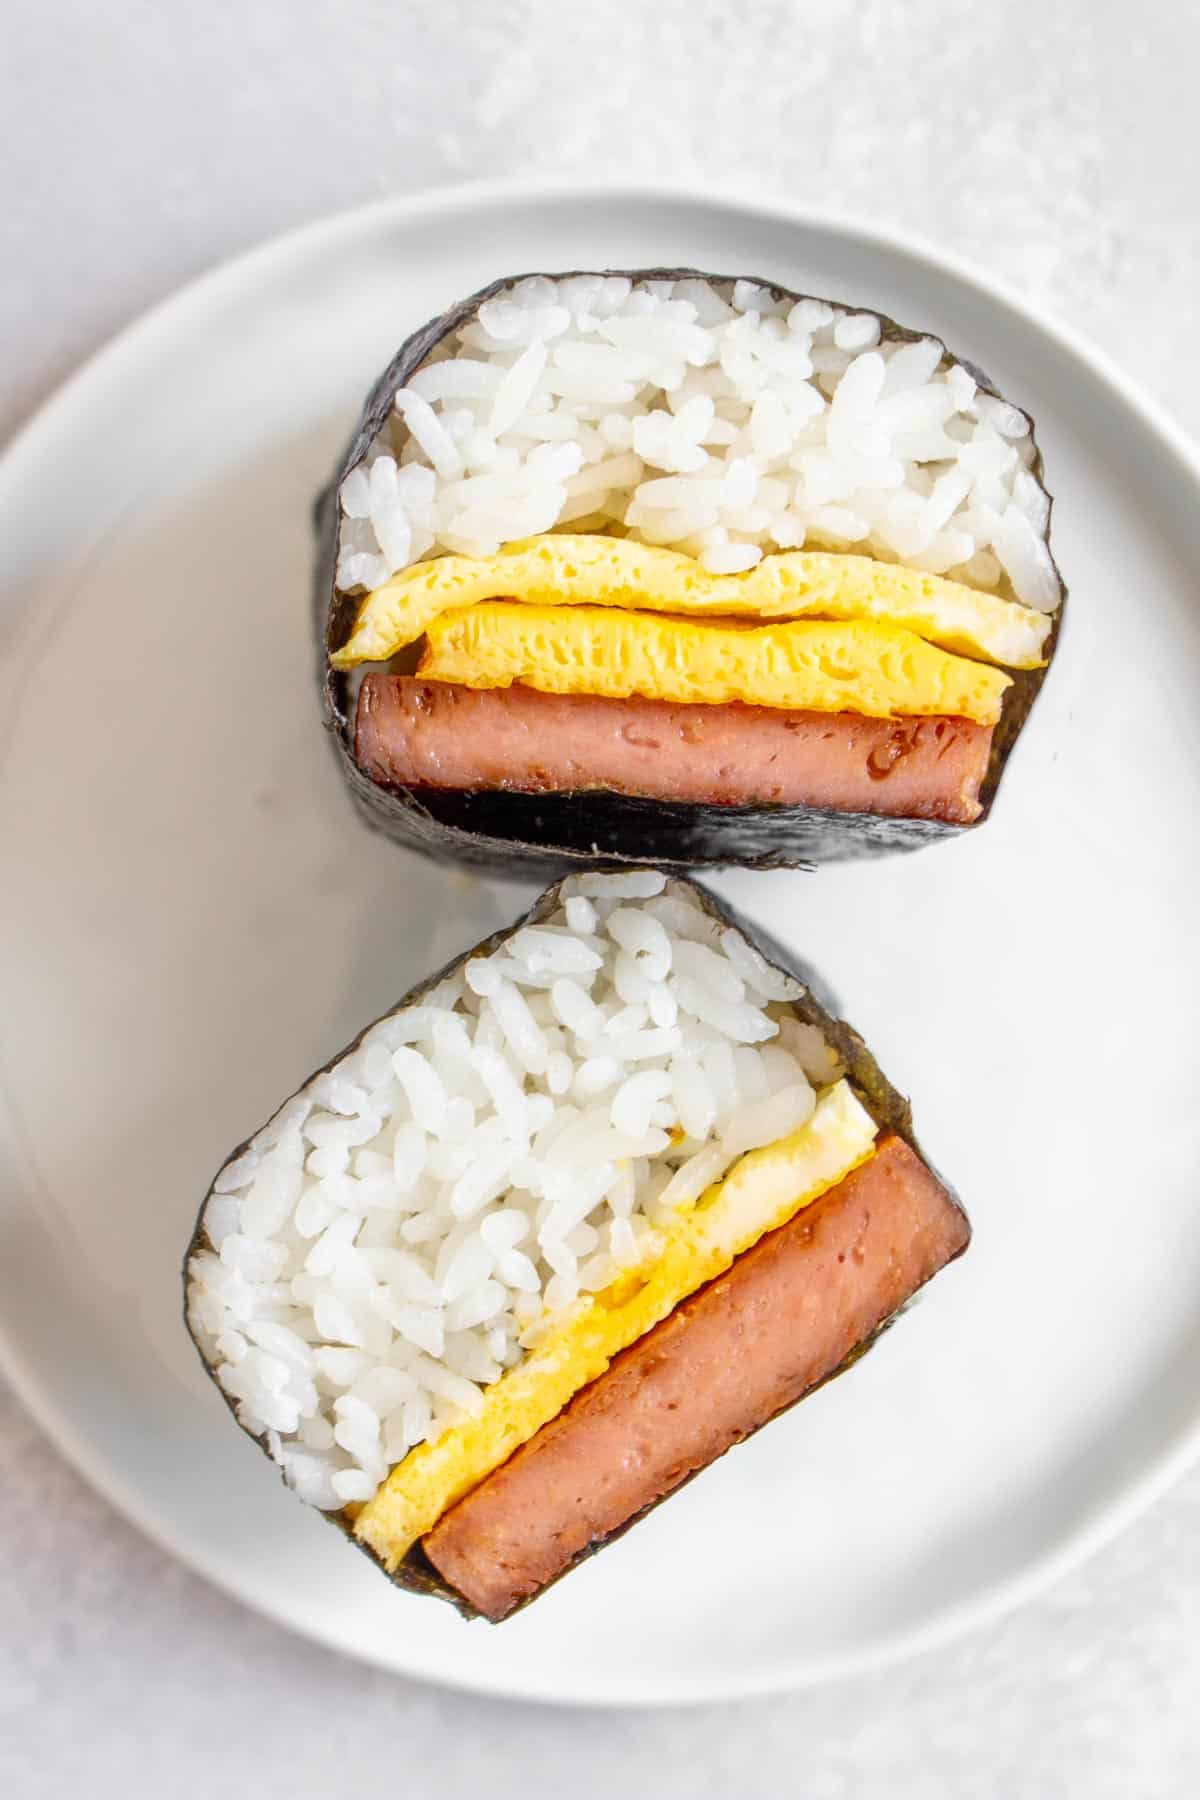 Two pieces of spam musubi with egg, one with two layers of egg.